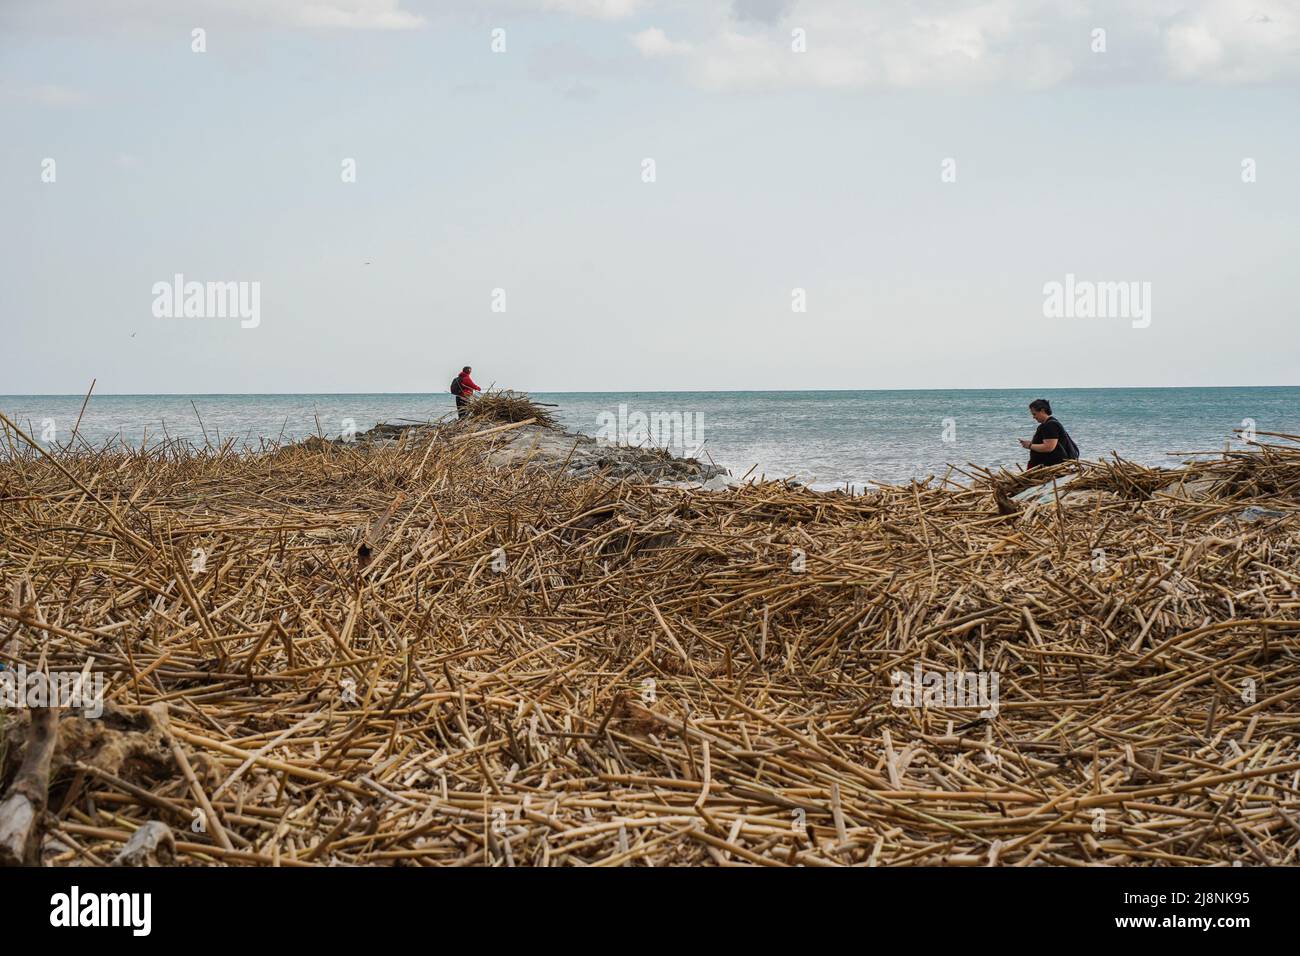 Debris, canes, giant reed canes, left after severe weather, covering the beach at river mouth Gudalhorce, Malaga, Spain. Stock Photo